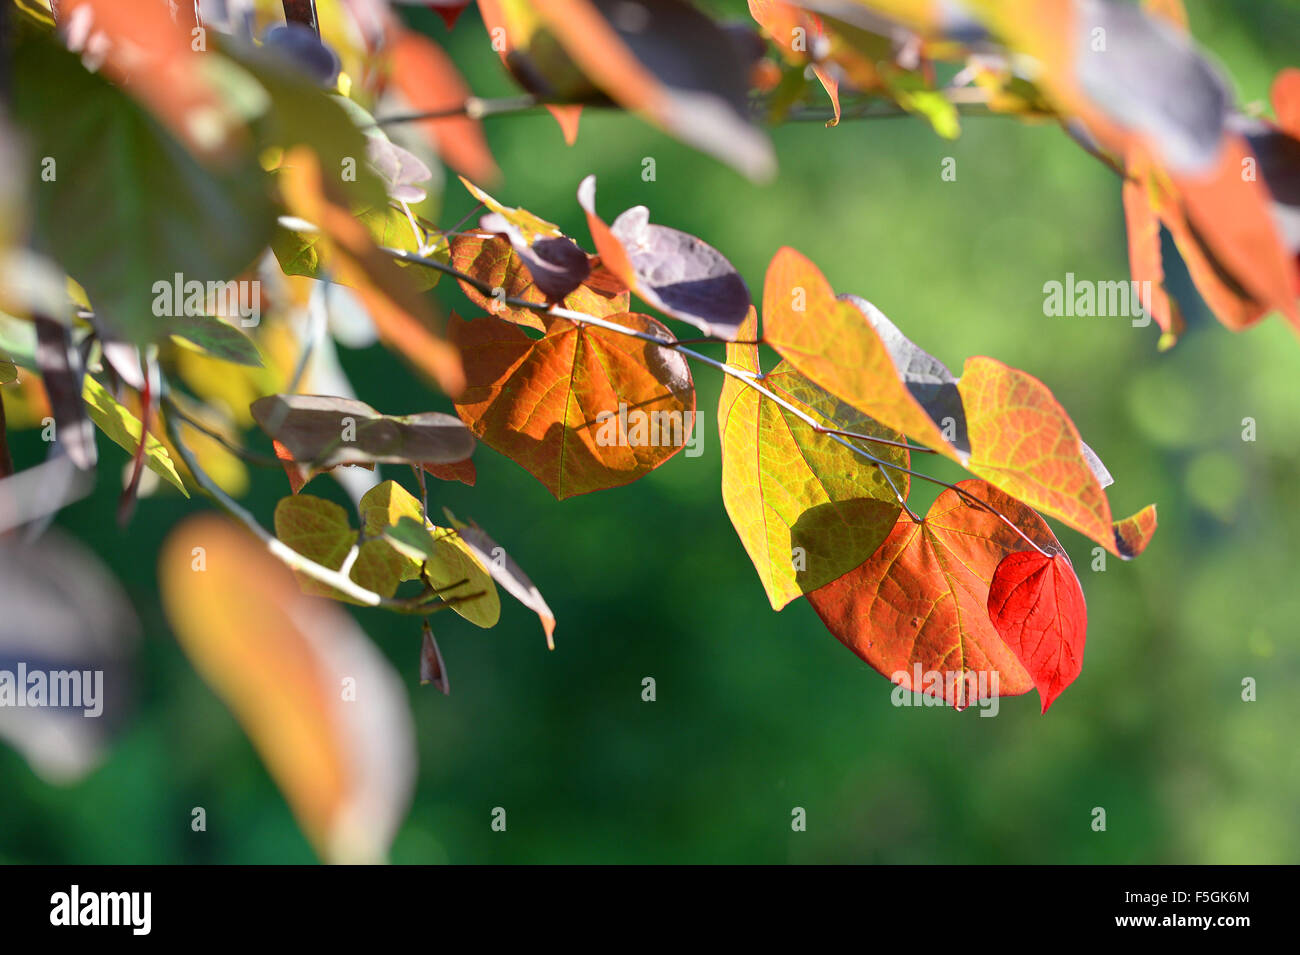 Heart shaped leaves turning into Fall colors Stock Photo